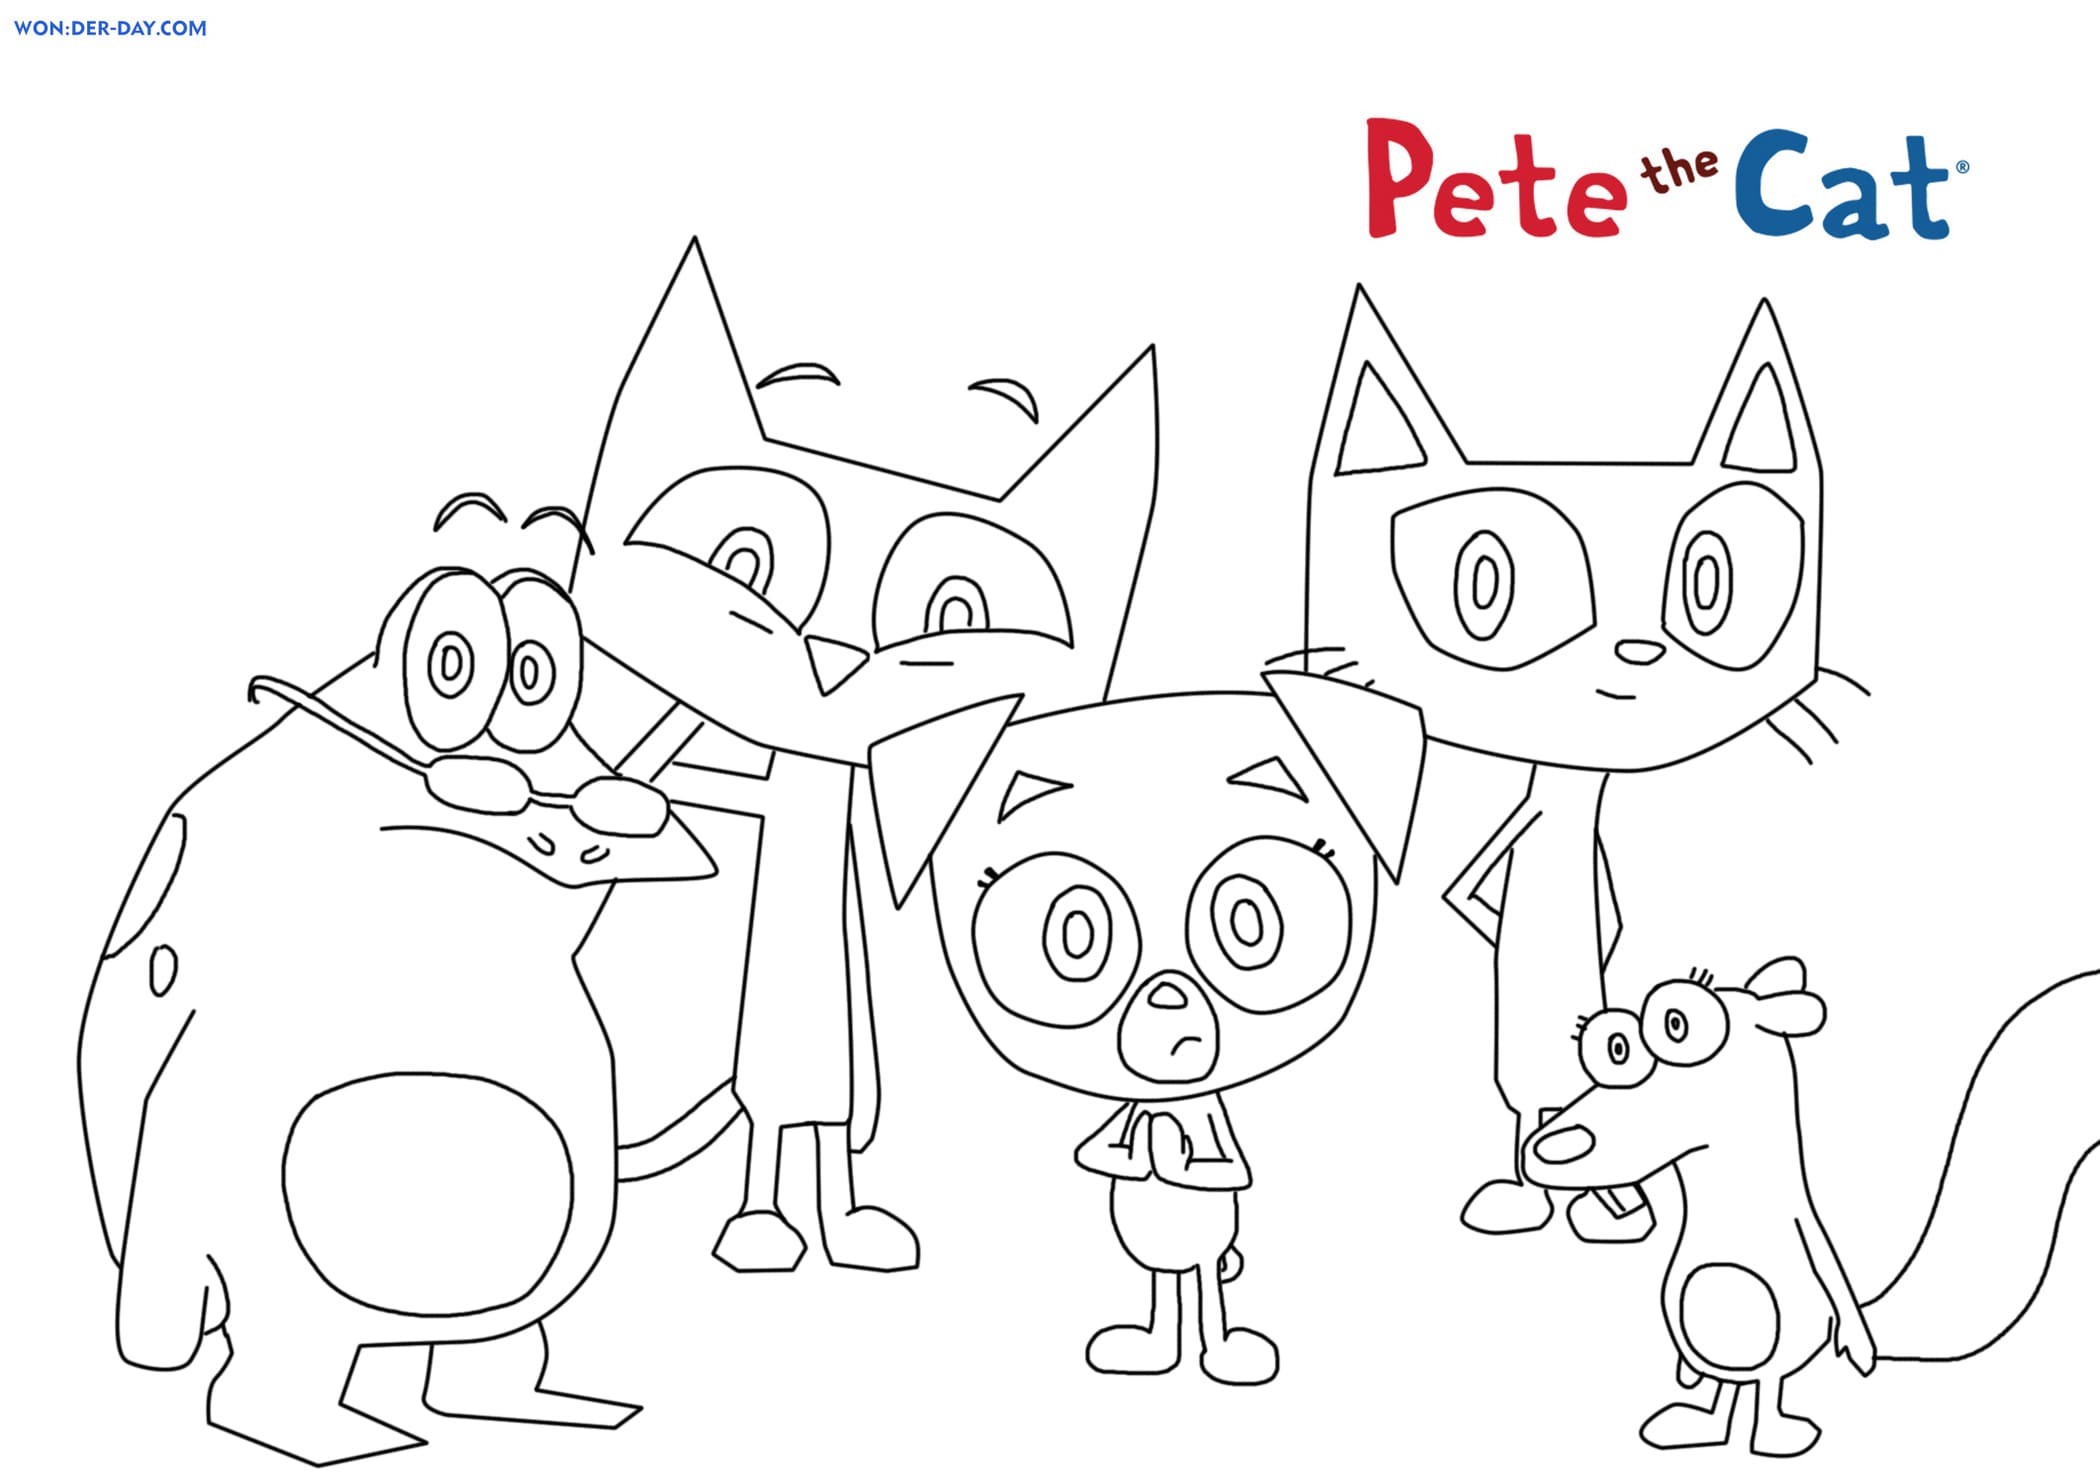 Pete the Cat coloring pages. Free coloring pages WONDER DAY